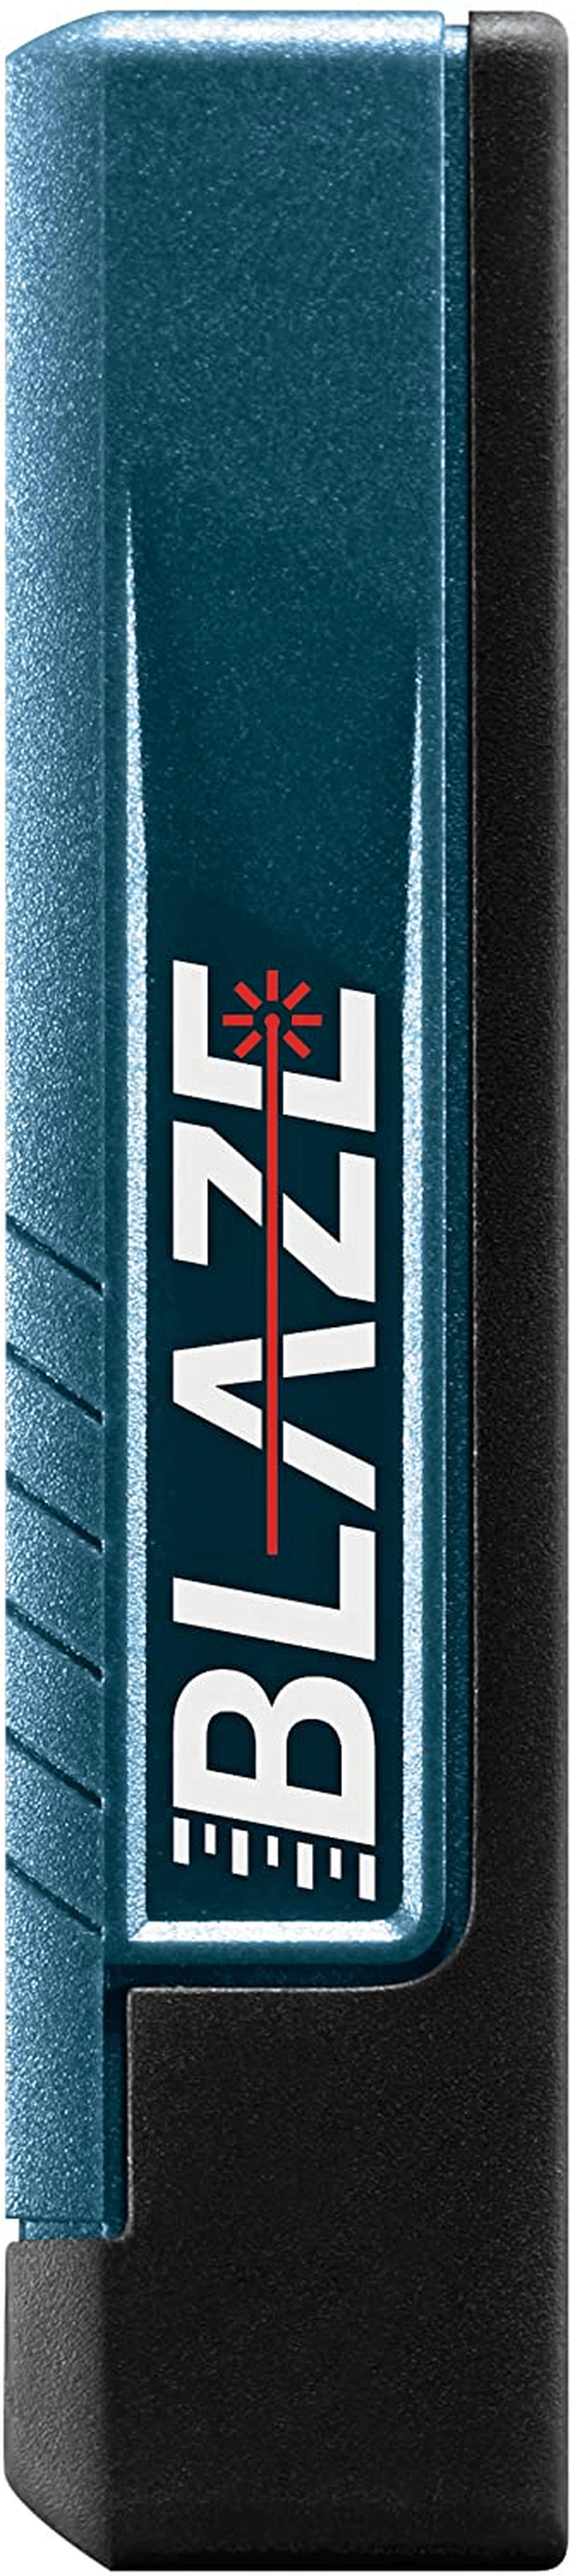 Bosch GLM20 Blaze 65ft Laser Distance Measure With Real Time Measuring Hardware > Tools > Measuring Tools & Sensors BOSCH   